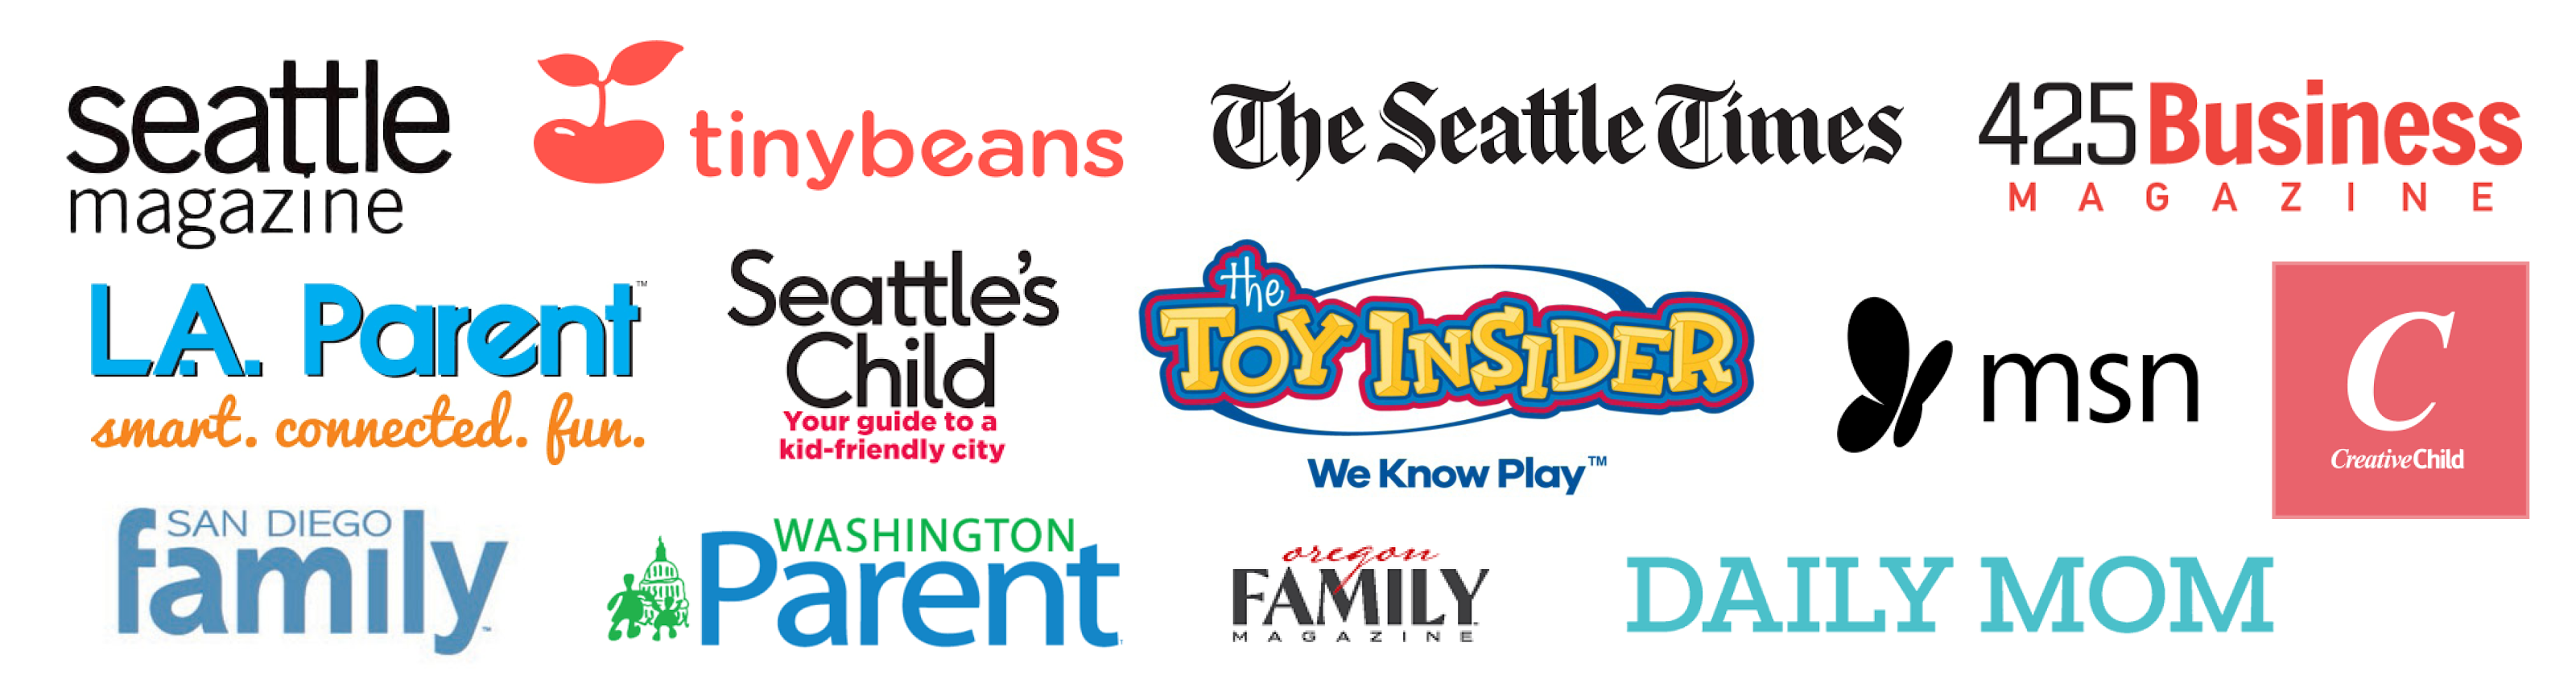 SimplyFun has been featured in publications such as The Seattle Times, TinyBeans, The Toy Insider, and more.